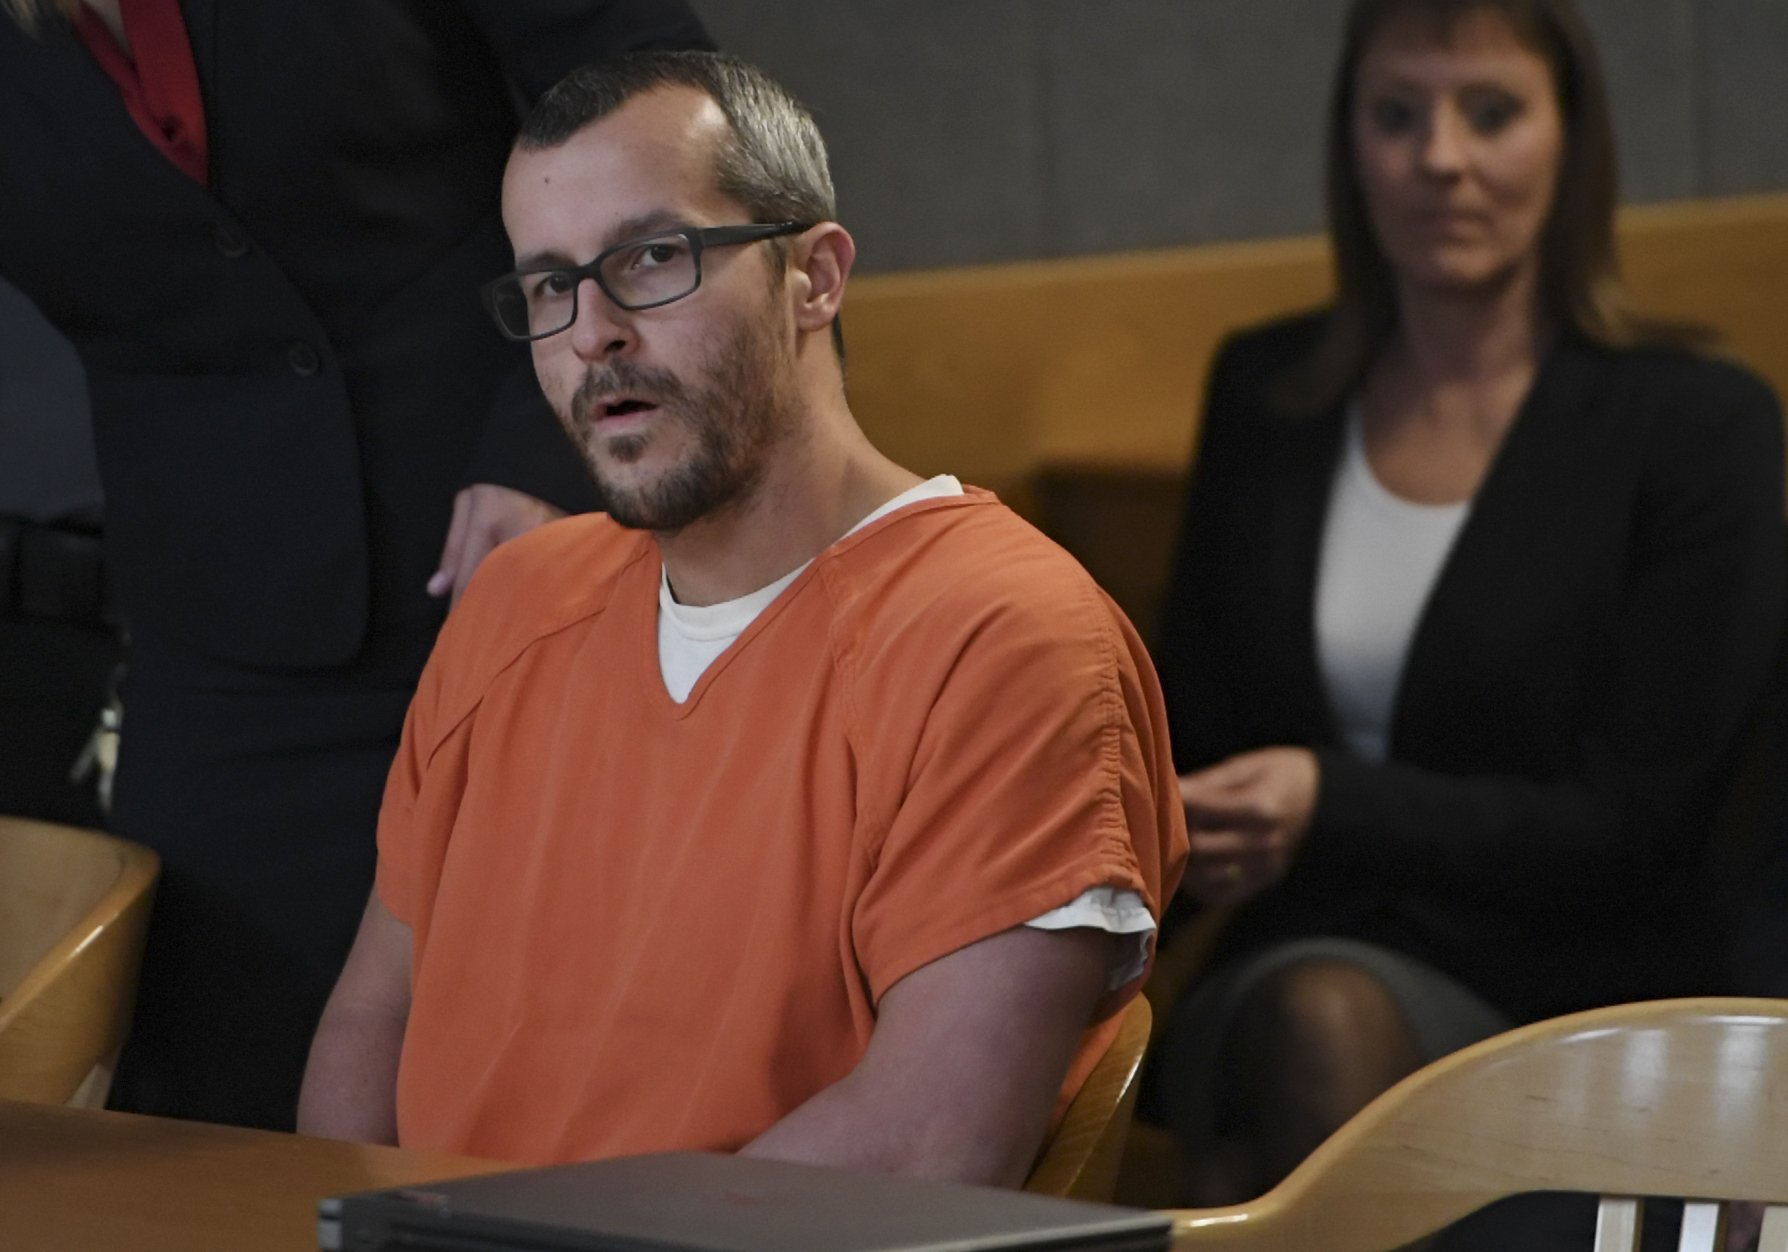 Christopher Watts at the Weld County Courthouse for his sentence hearing on November 19, 2018, in Greeley, Colorado. | Source: Getty Images